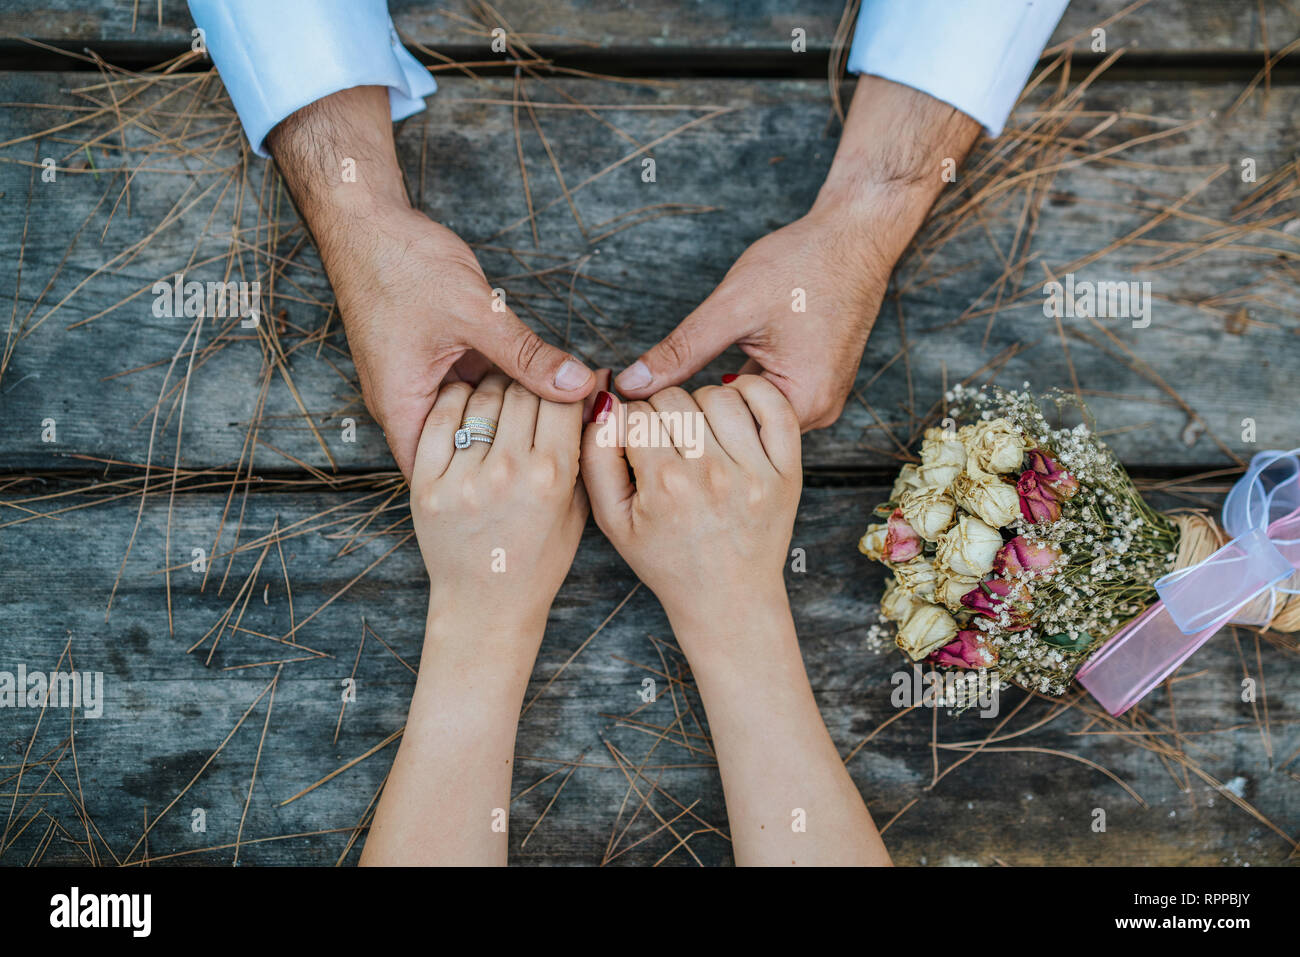 Wedding couple holding hands on wooden table with bouquet Stock Photo